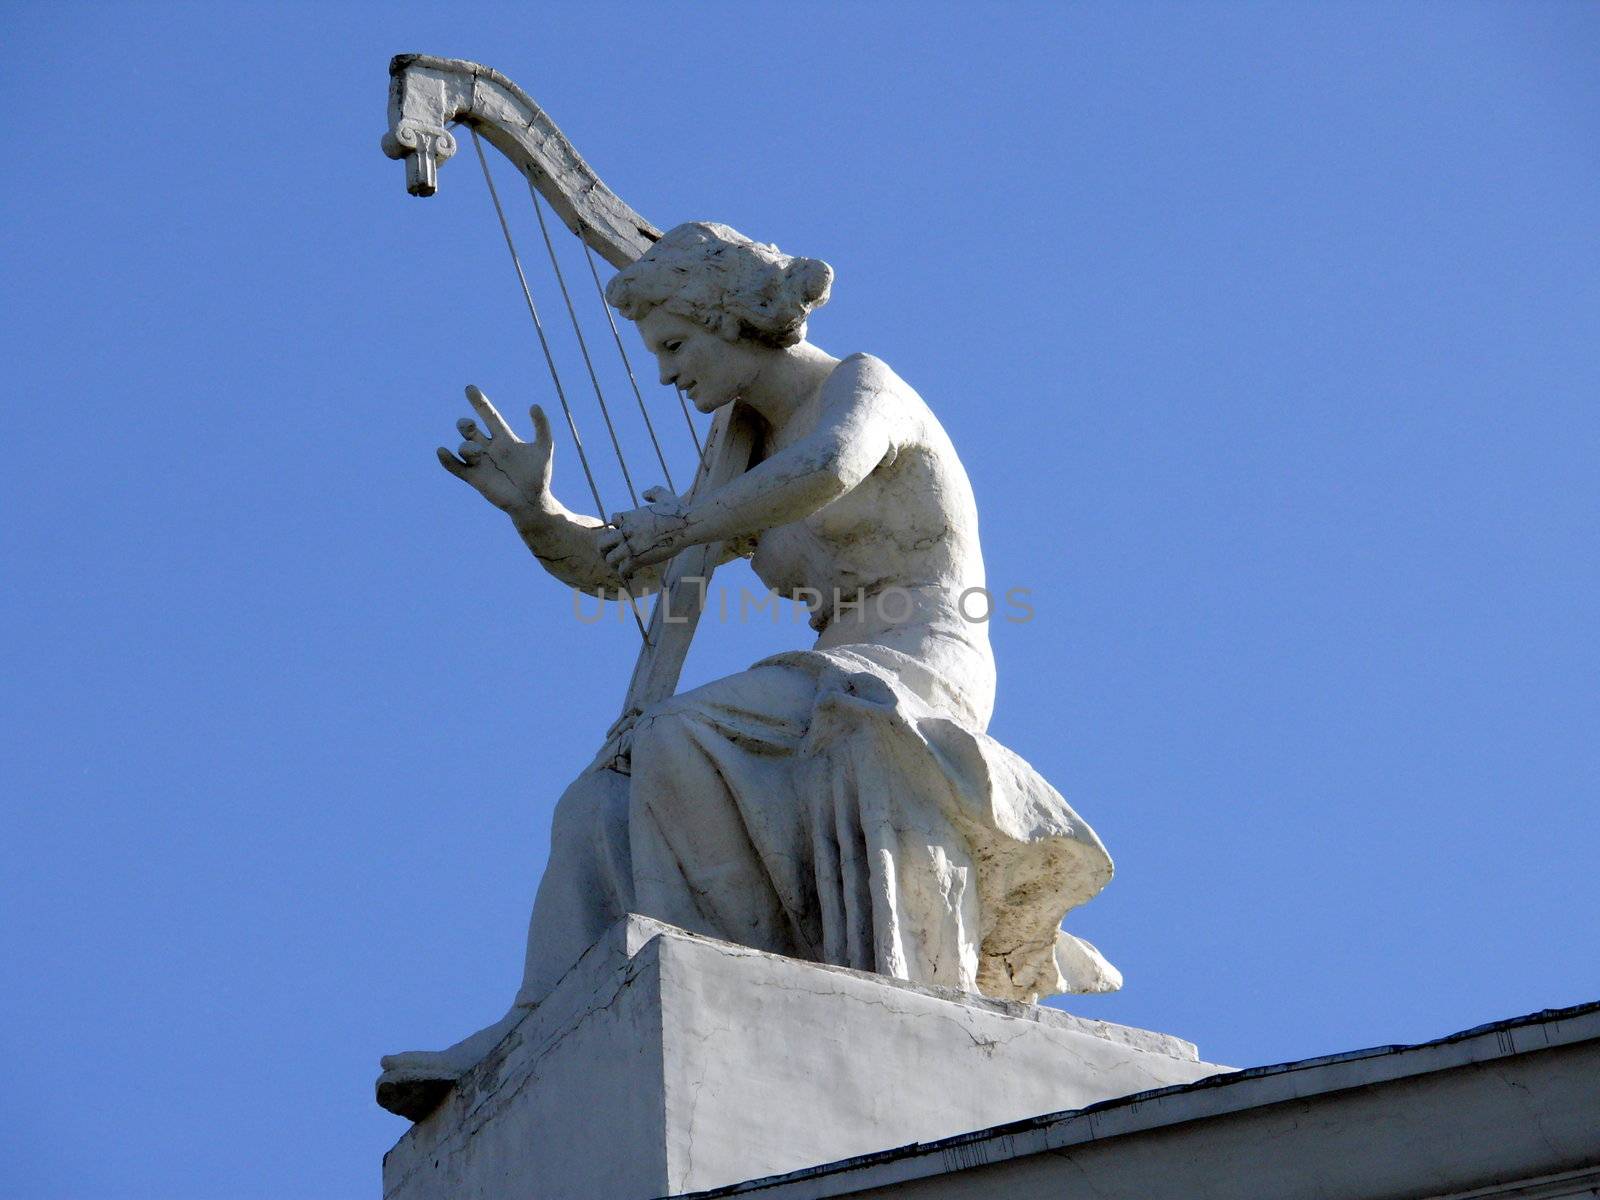 Sculpture of woman with harp in the roof by Stoyanov